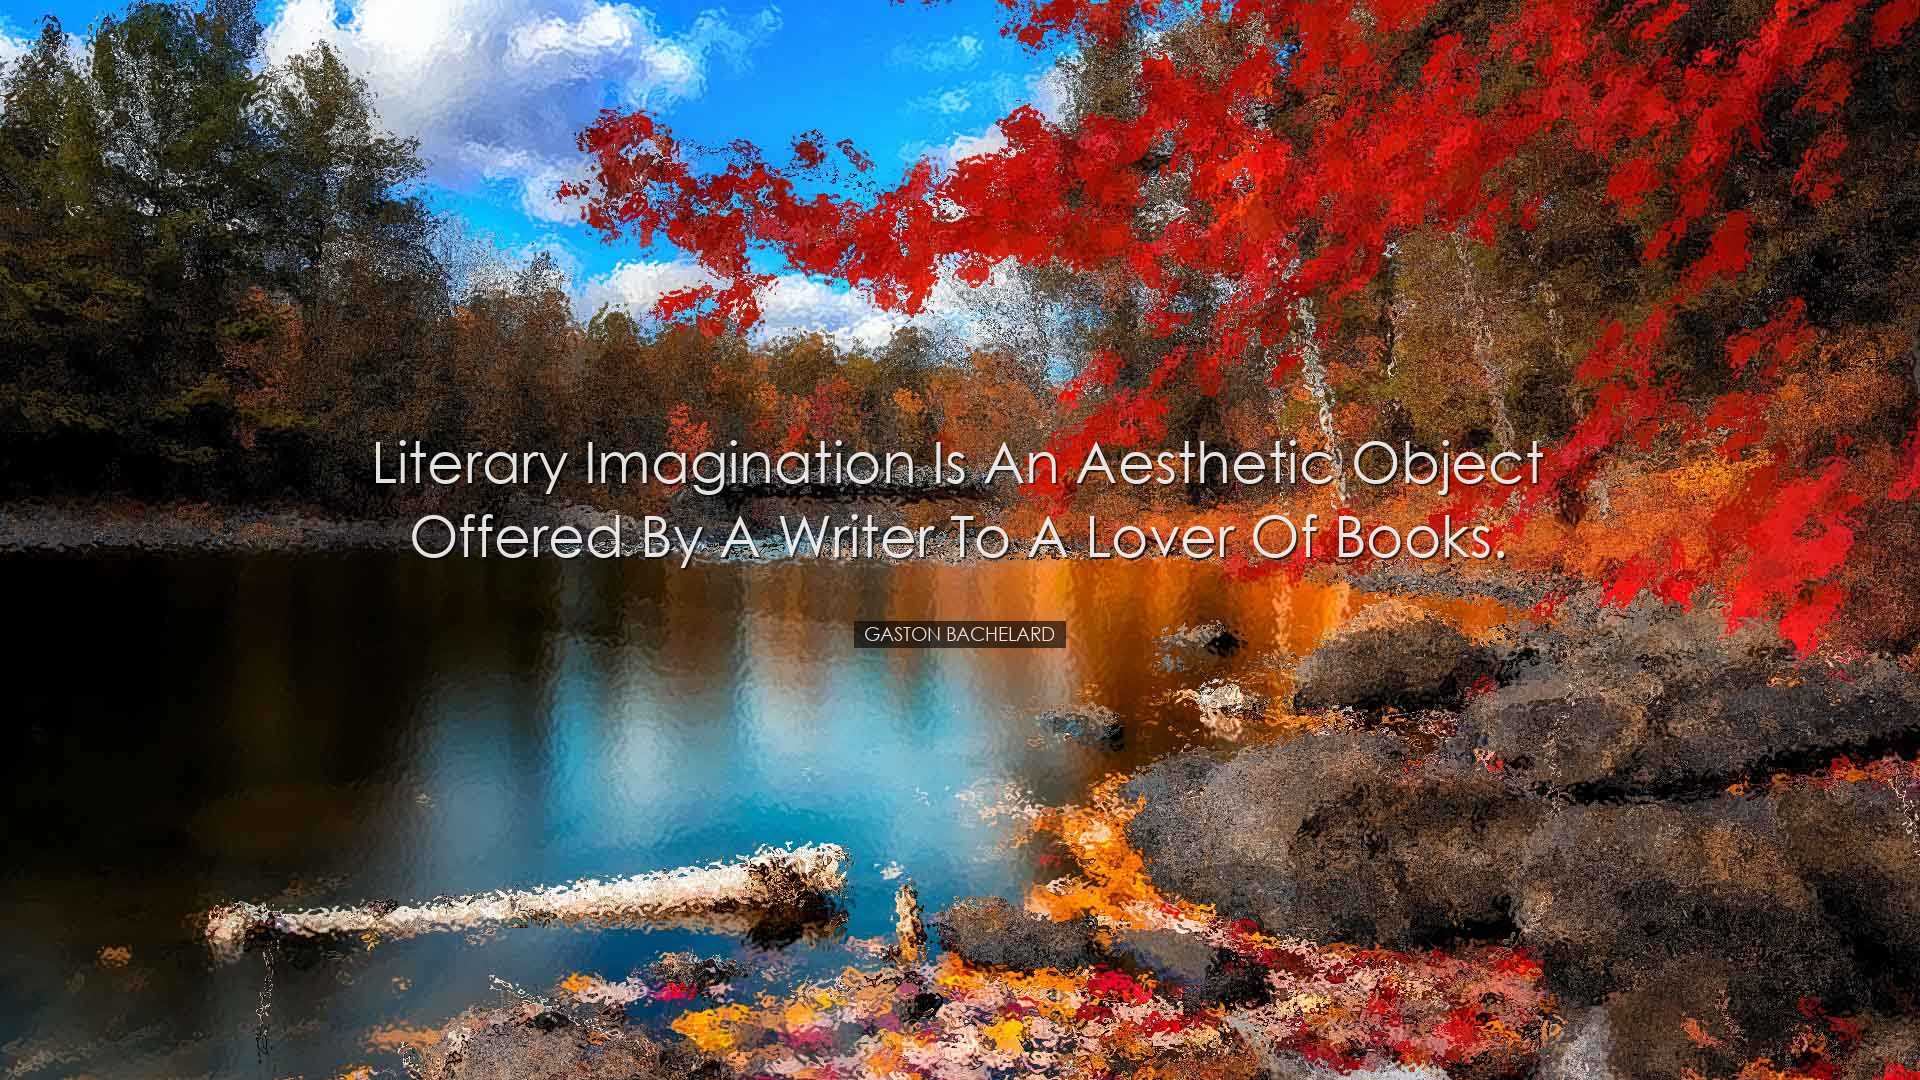 Literary imagination is an aesthetic object offered by a writer to